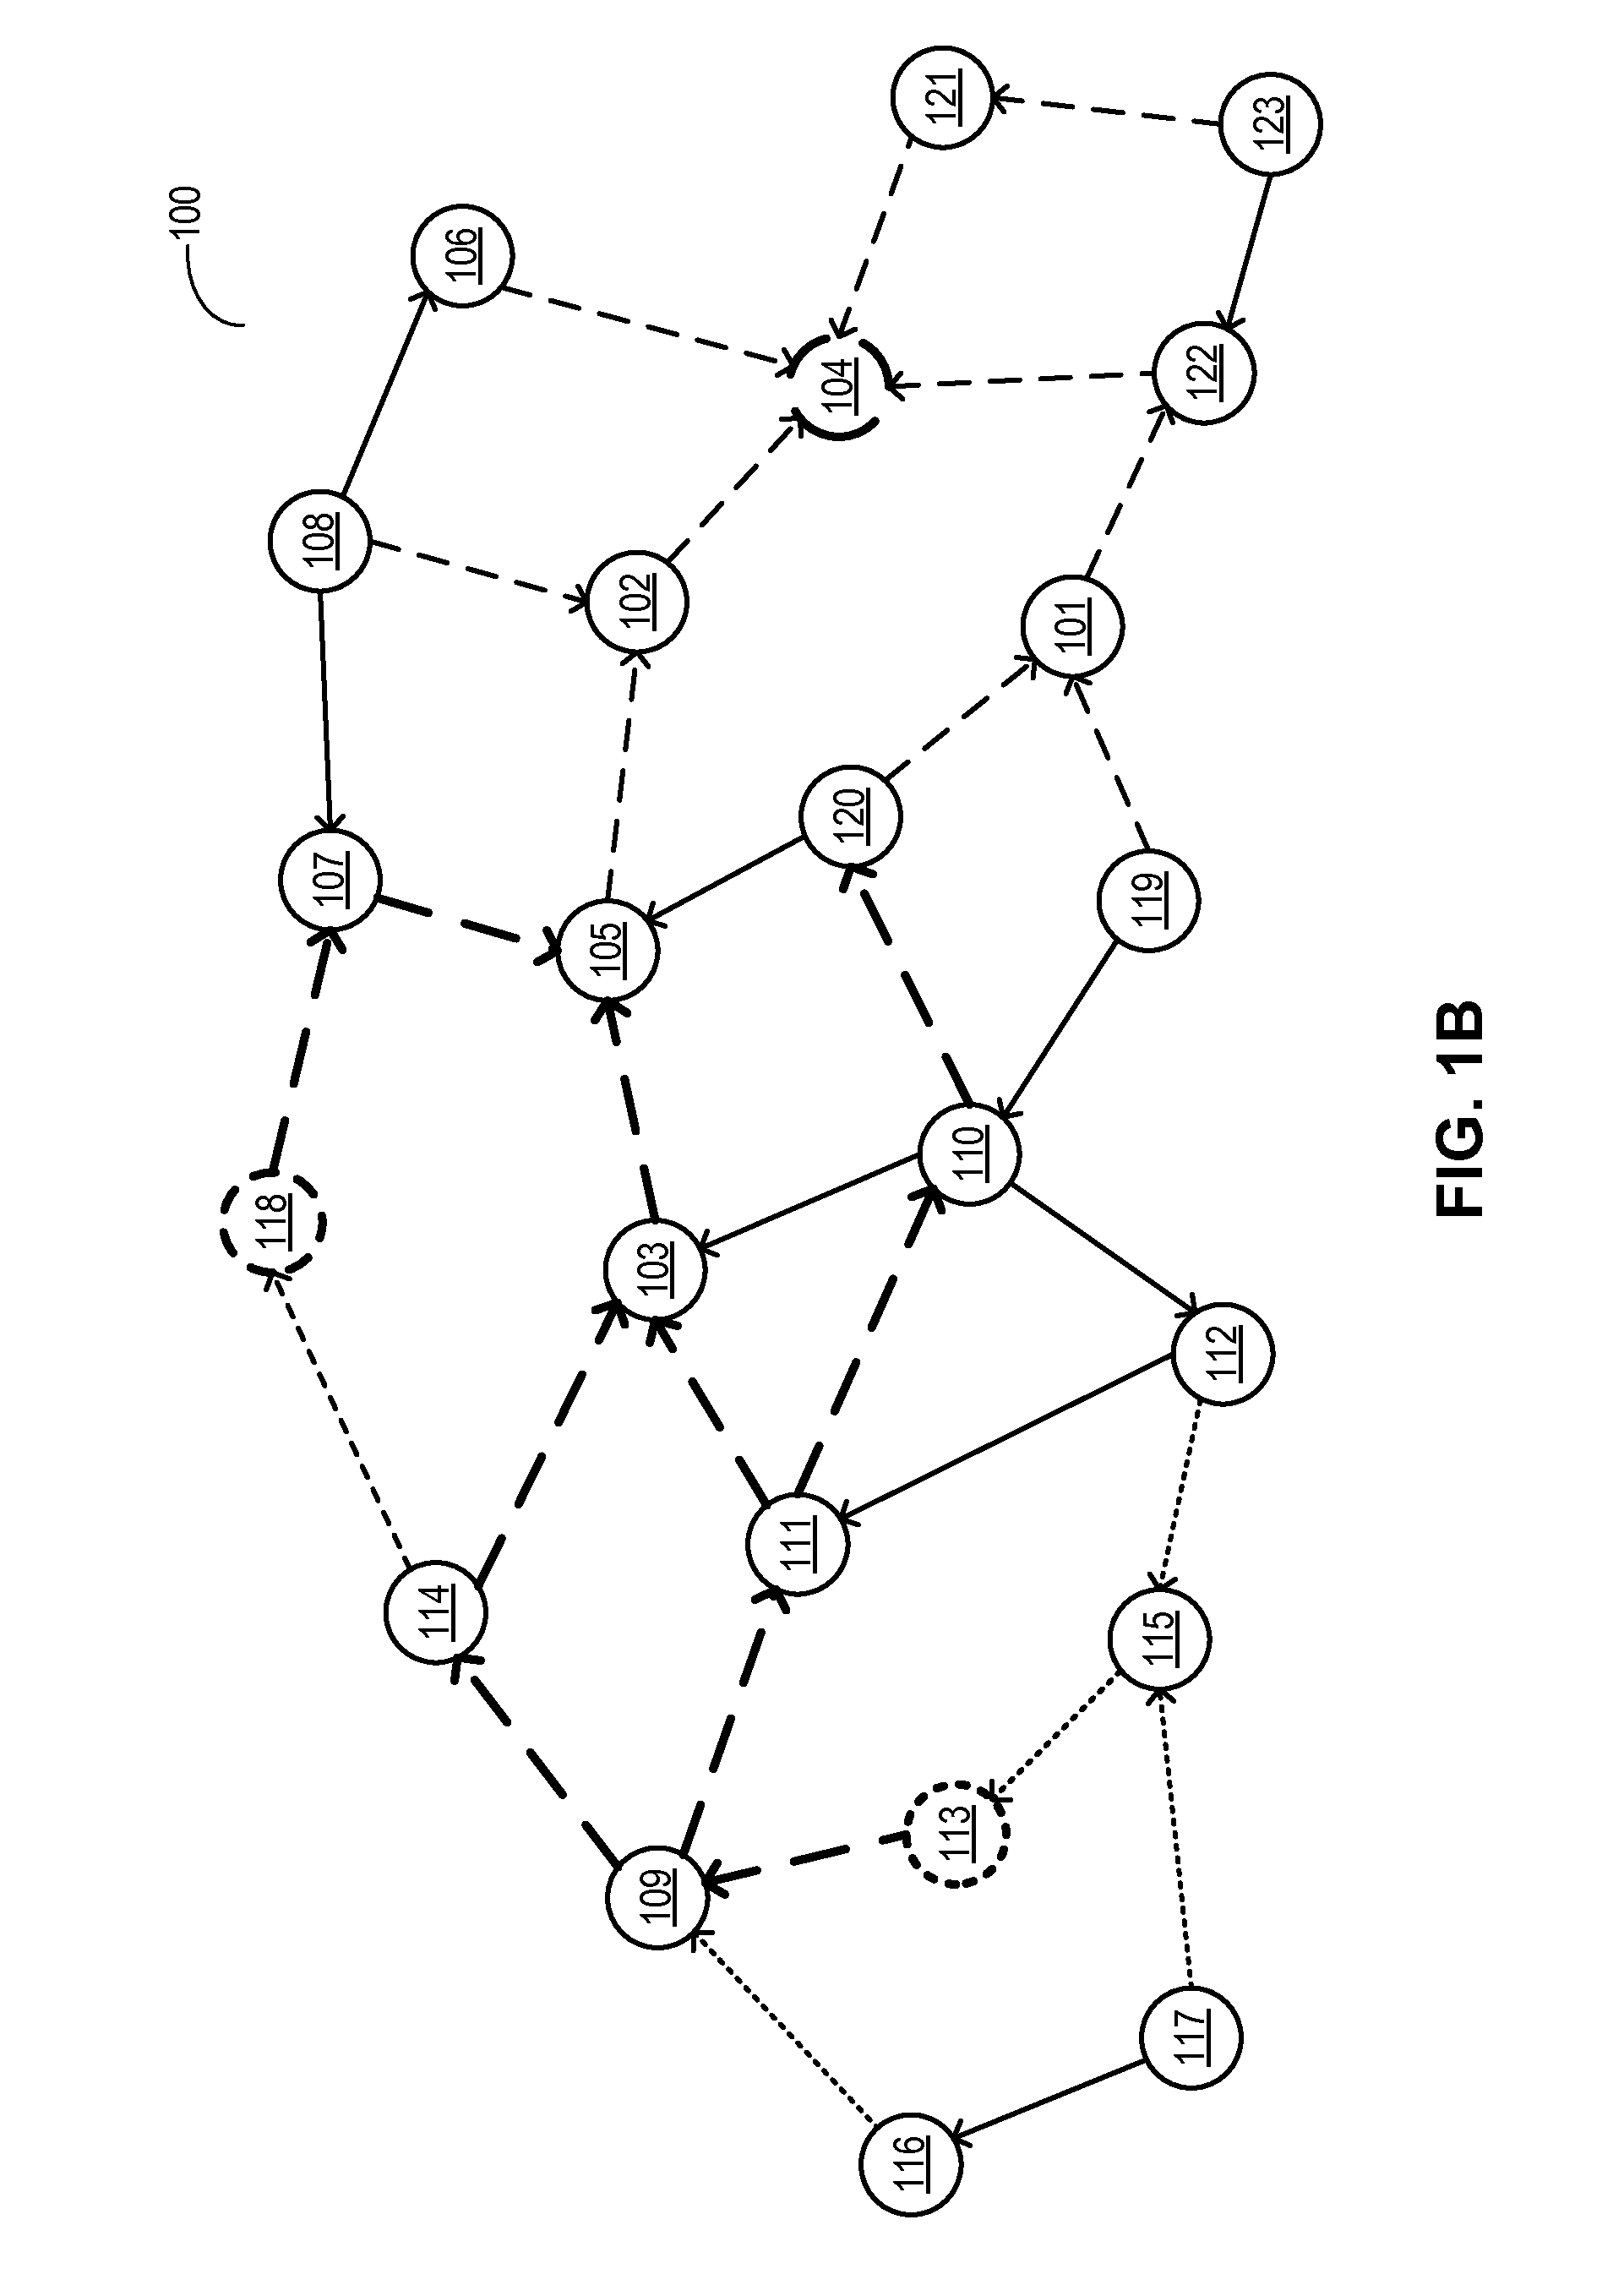 Distance-based routing in an information-centric network